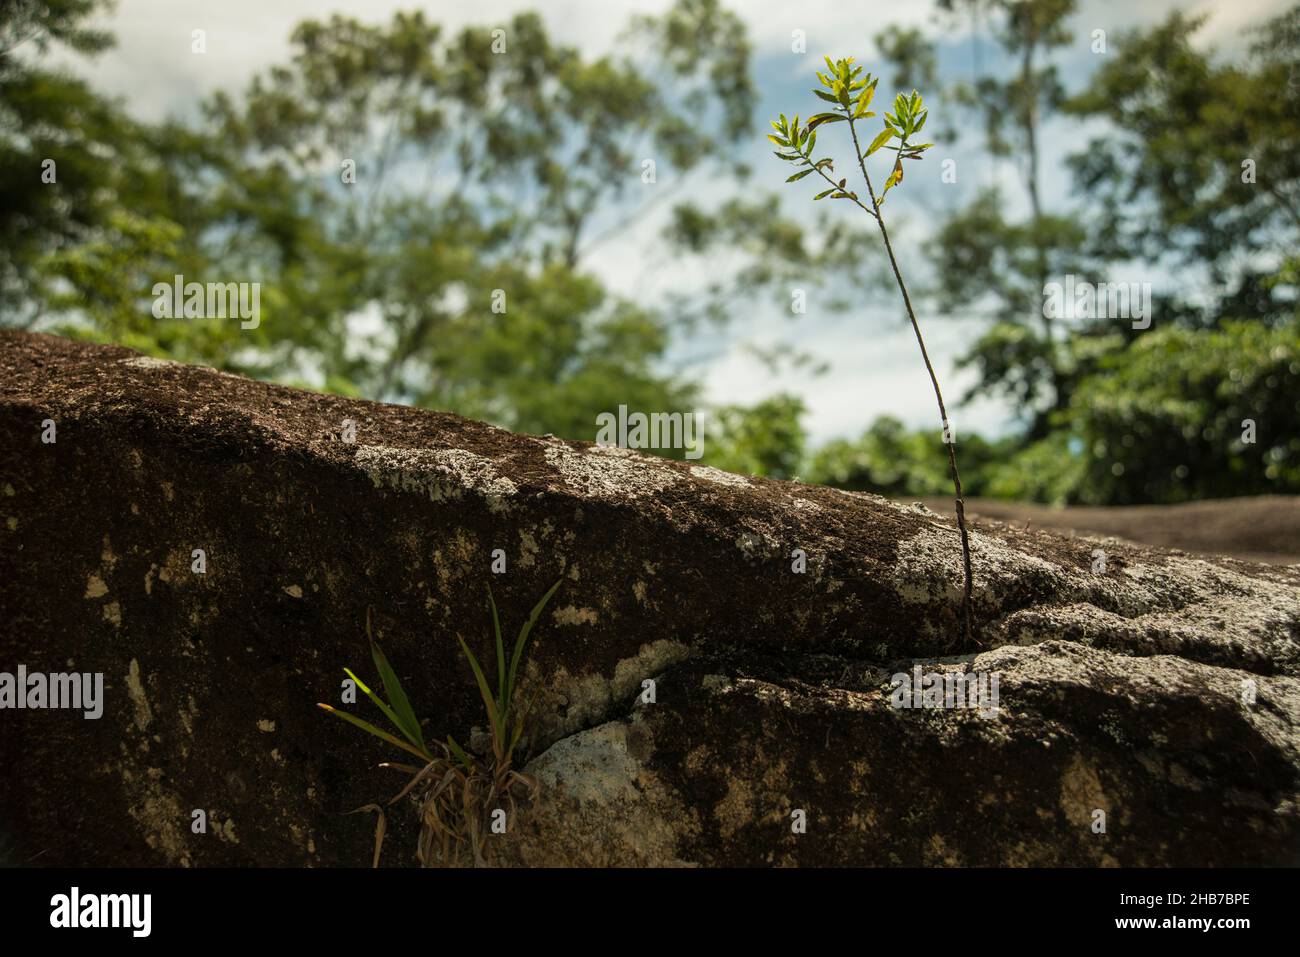 A plant and small tree grows on a stone Stock Photo